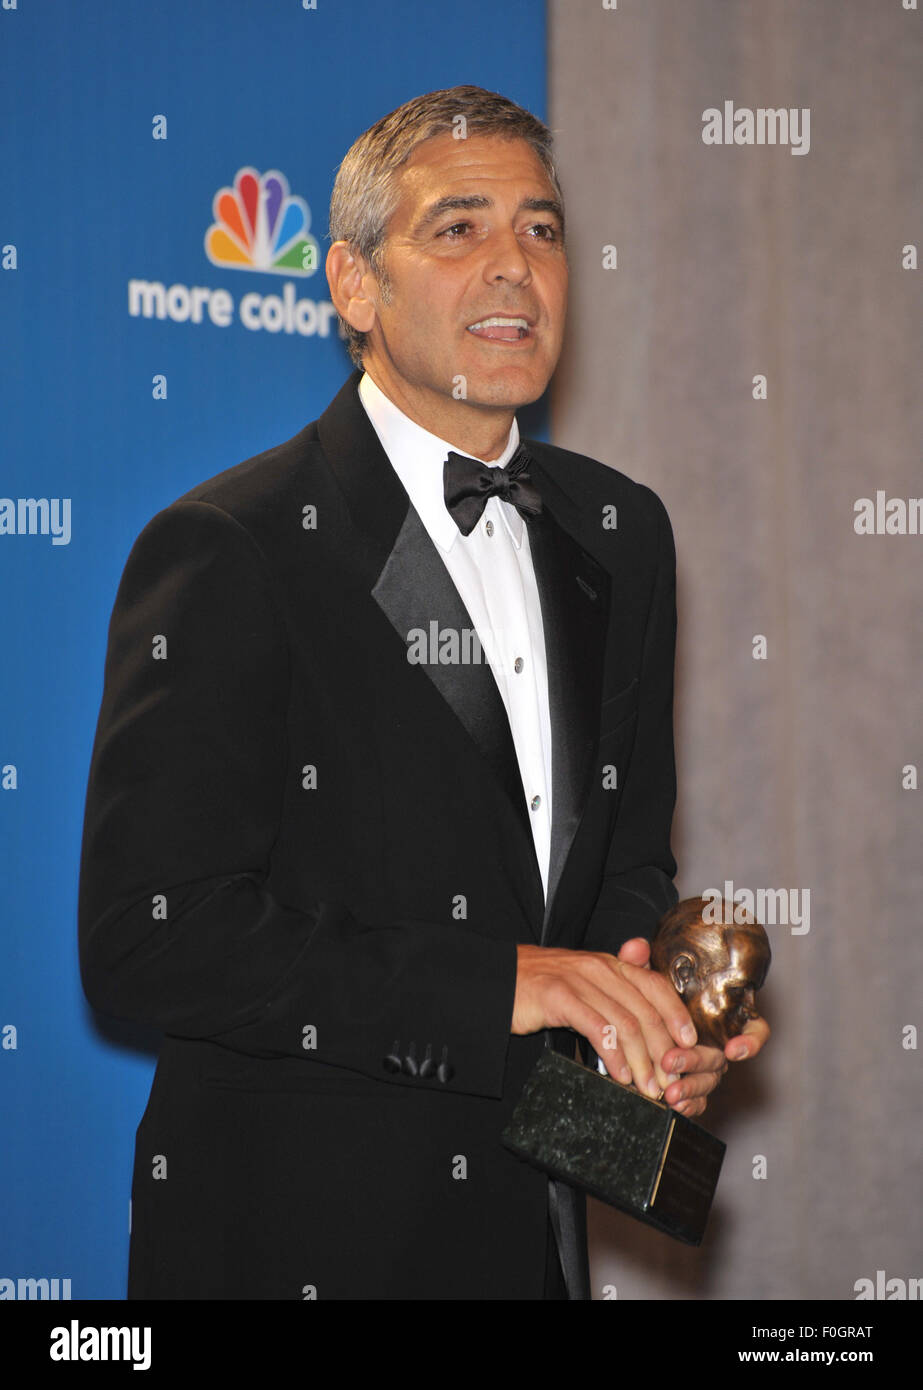 LOS ANGELES, CA - AUGUST 29, 2010: George Clooney at the 2010 Primetime Emmy Awards at the Nokia Theatre L.A. Live in downtown Los Angeles. Stock Photo